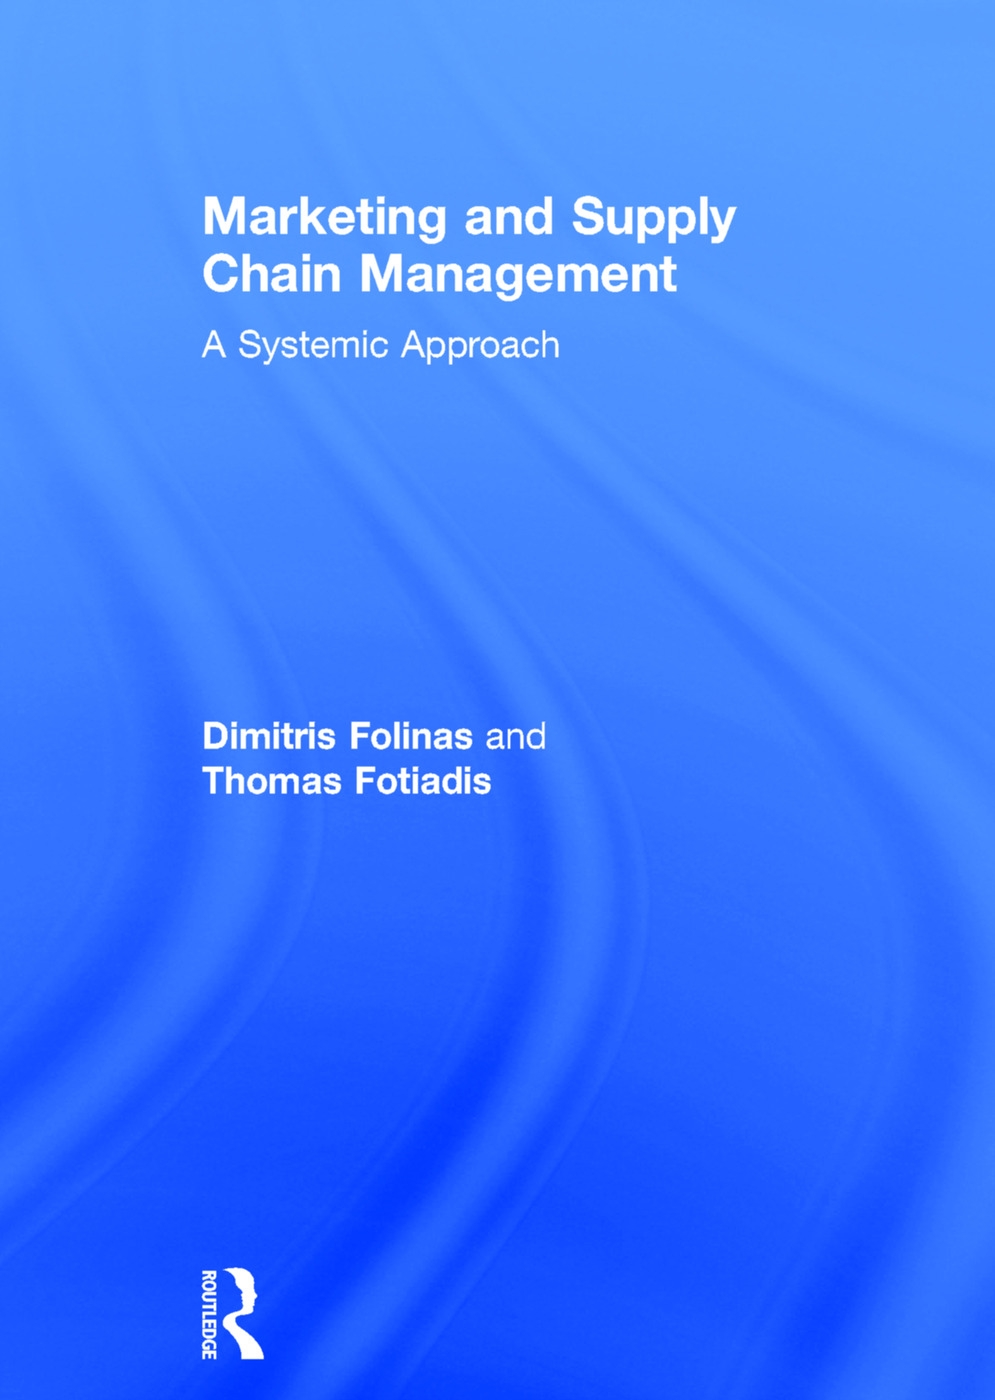 Marketing and Supply Chain Management: A Systemic Approach